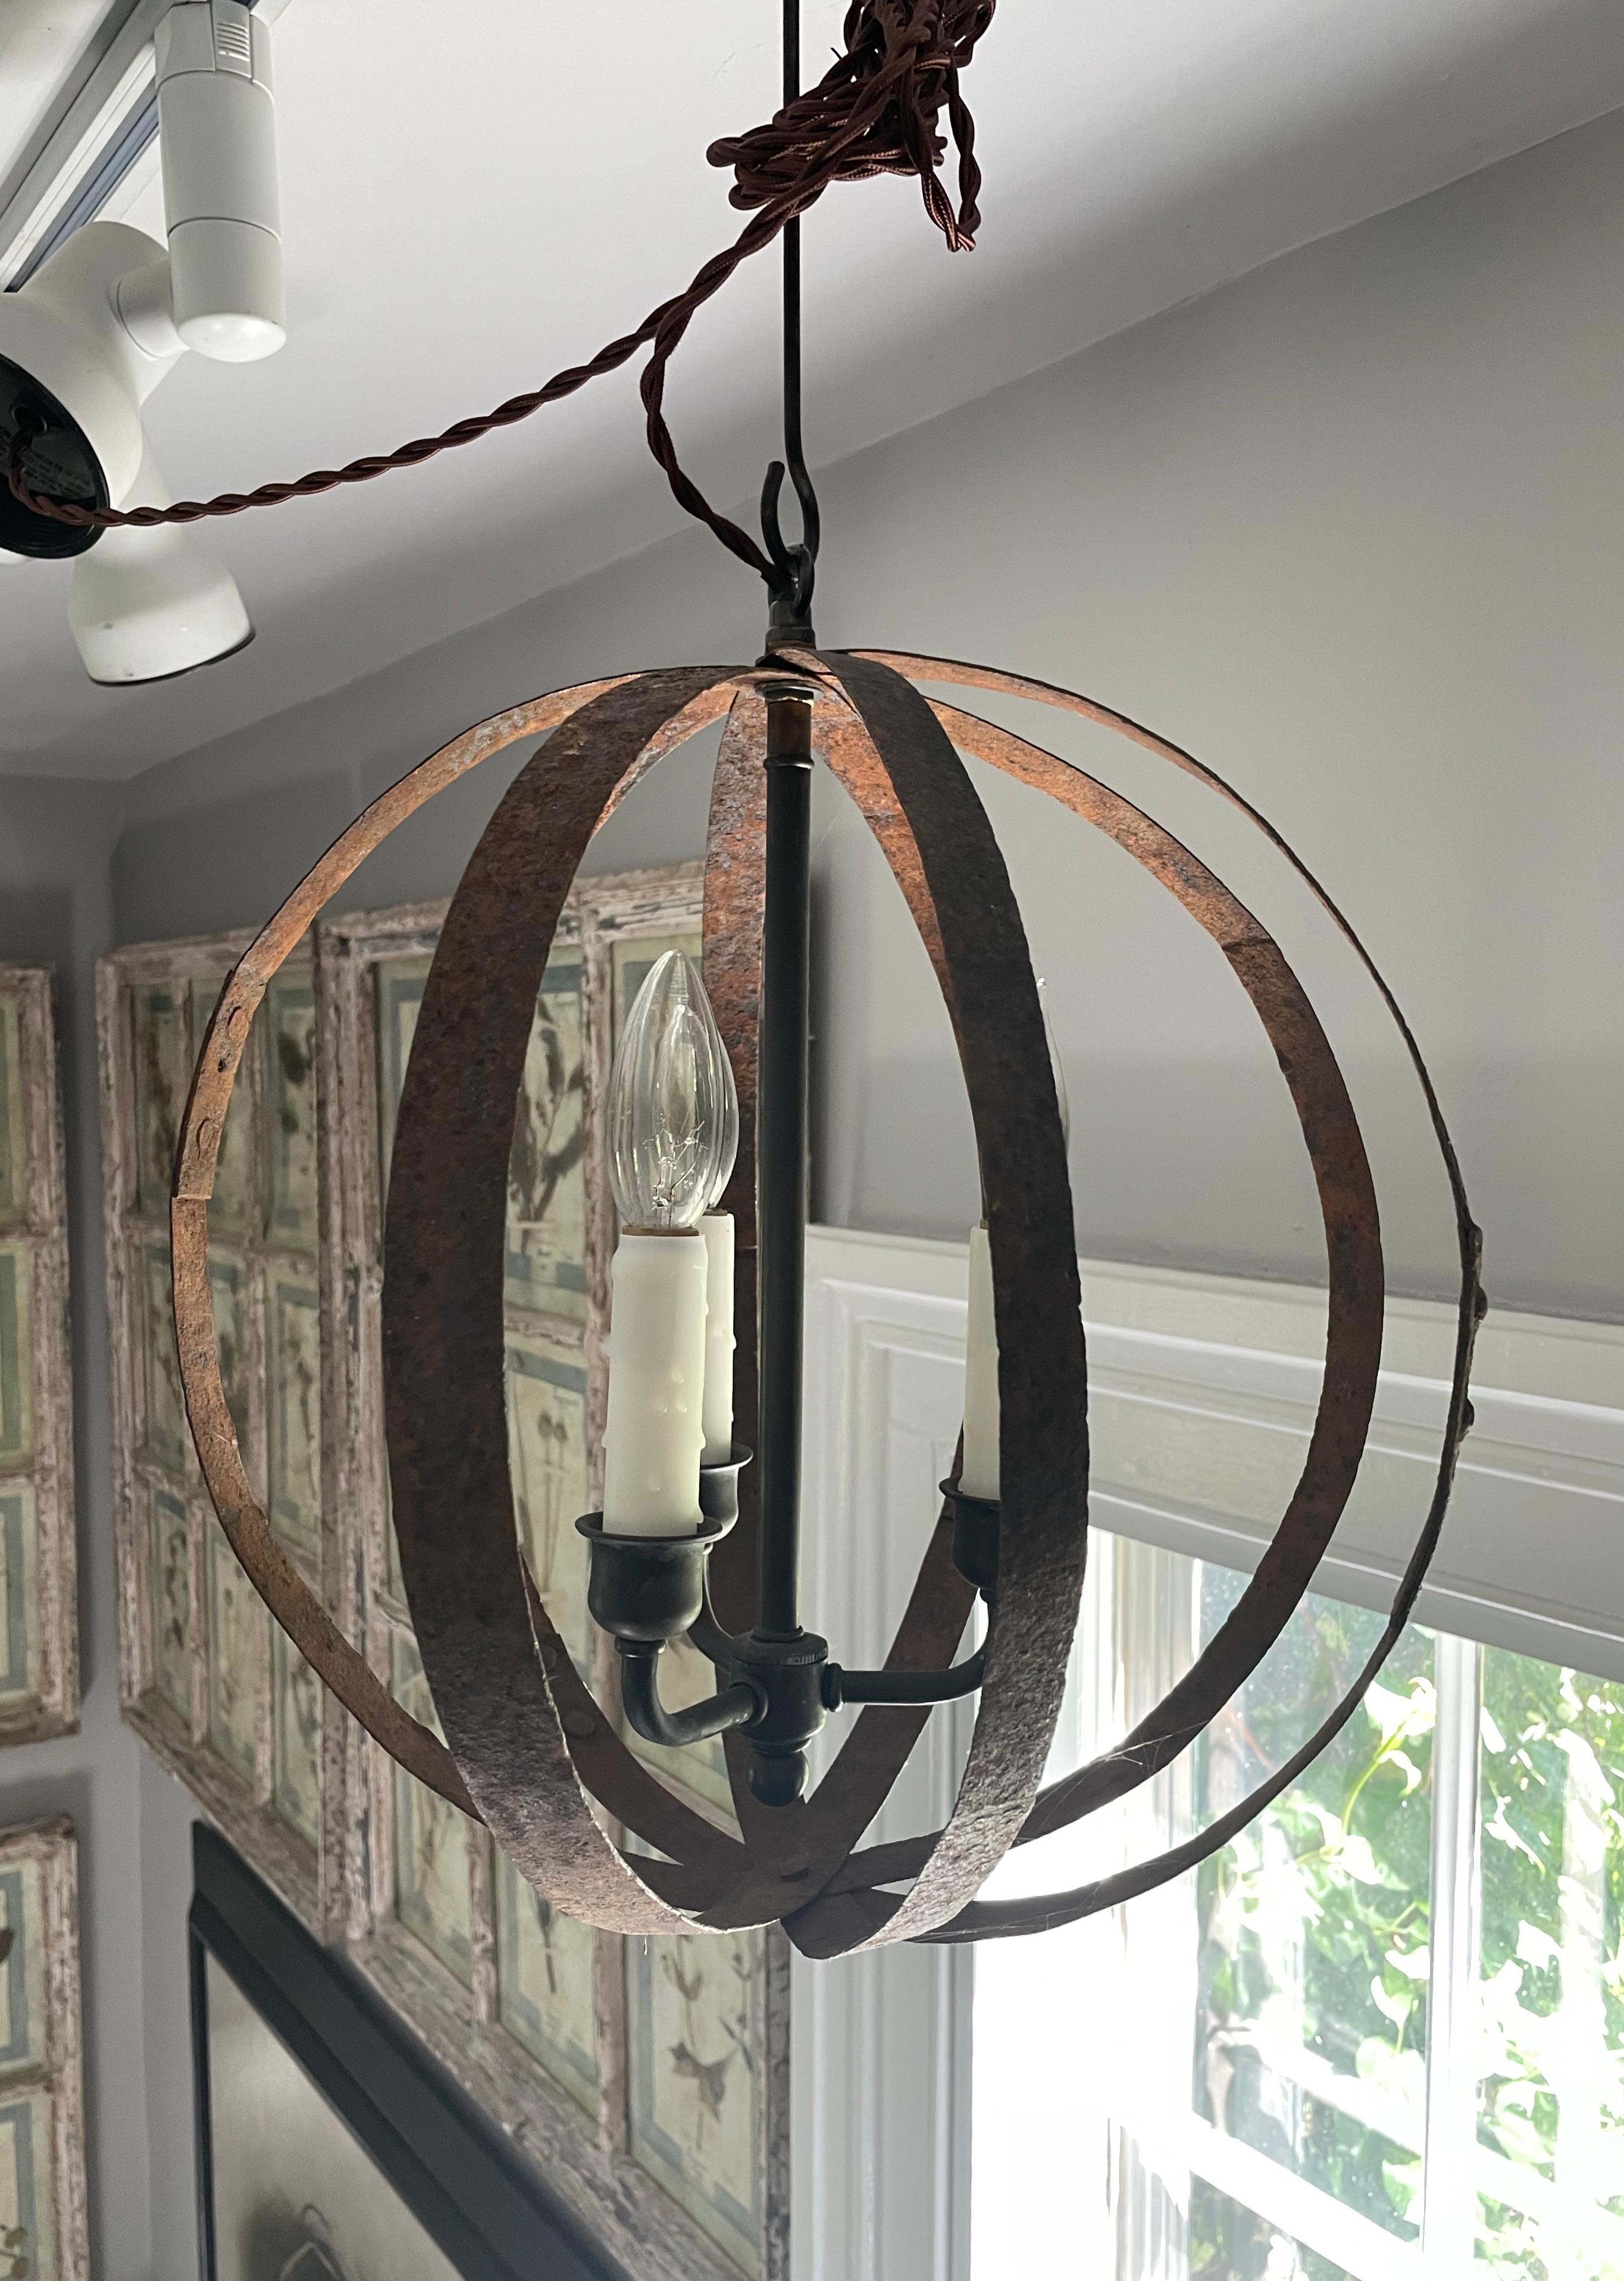 19th C French Wrought Iron Spherical Chandelier #1 6